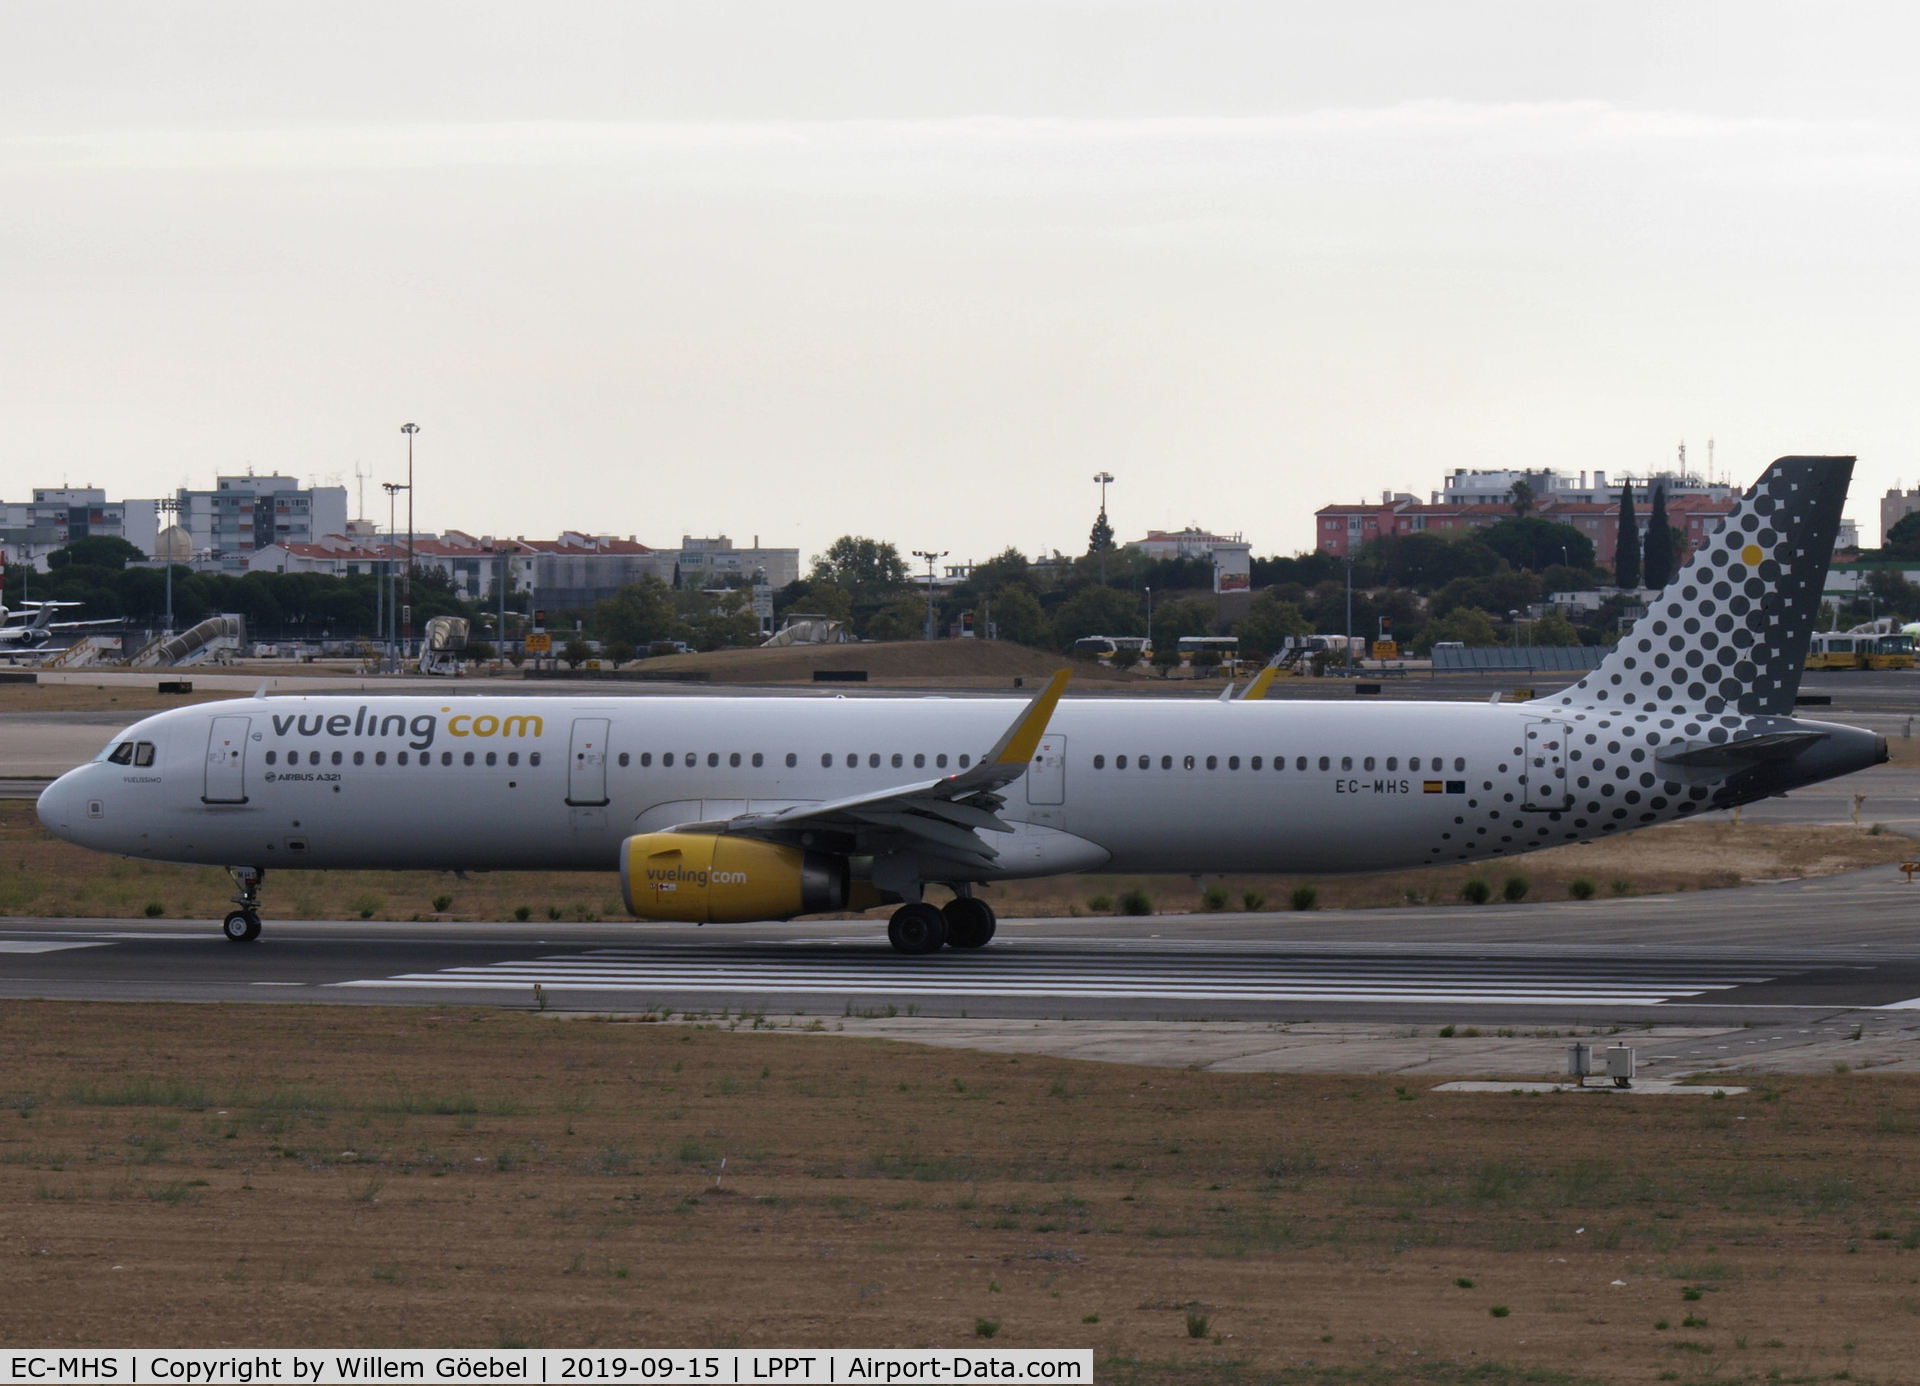 EC-MHS, 2015 Airbus A321-231 C/N 6740, Prepare for take off from Lisbon Airport